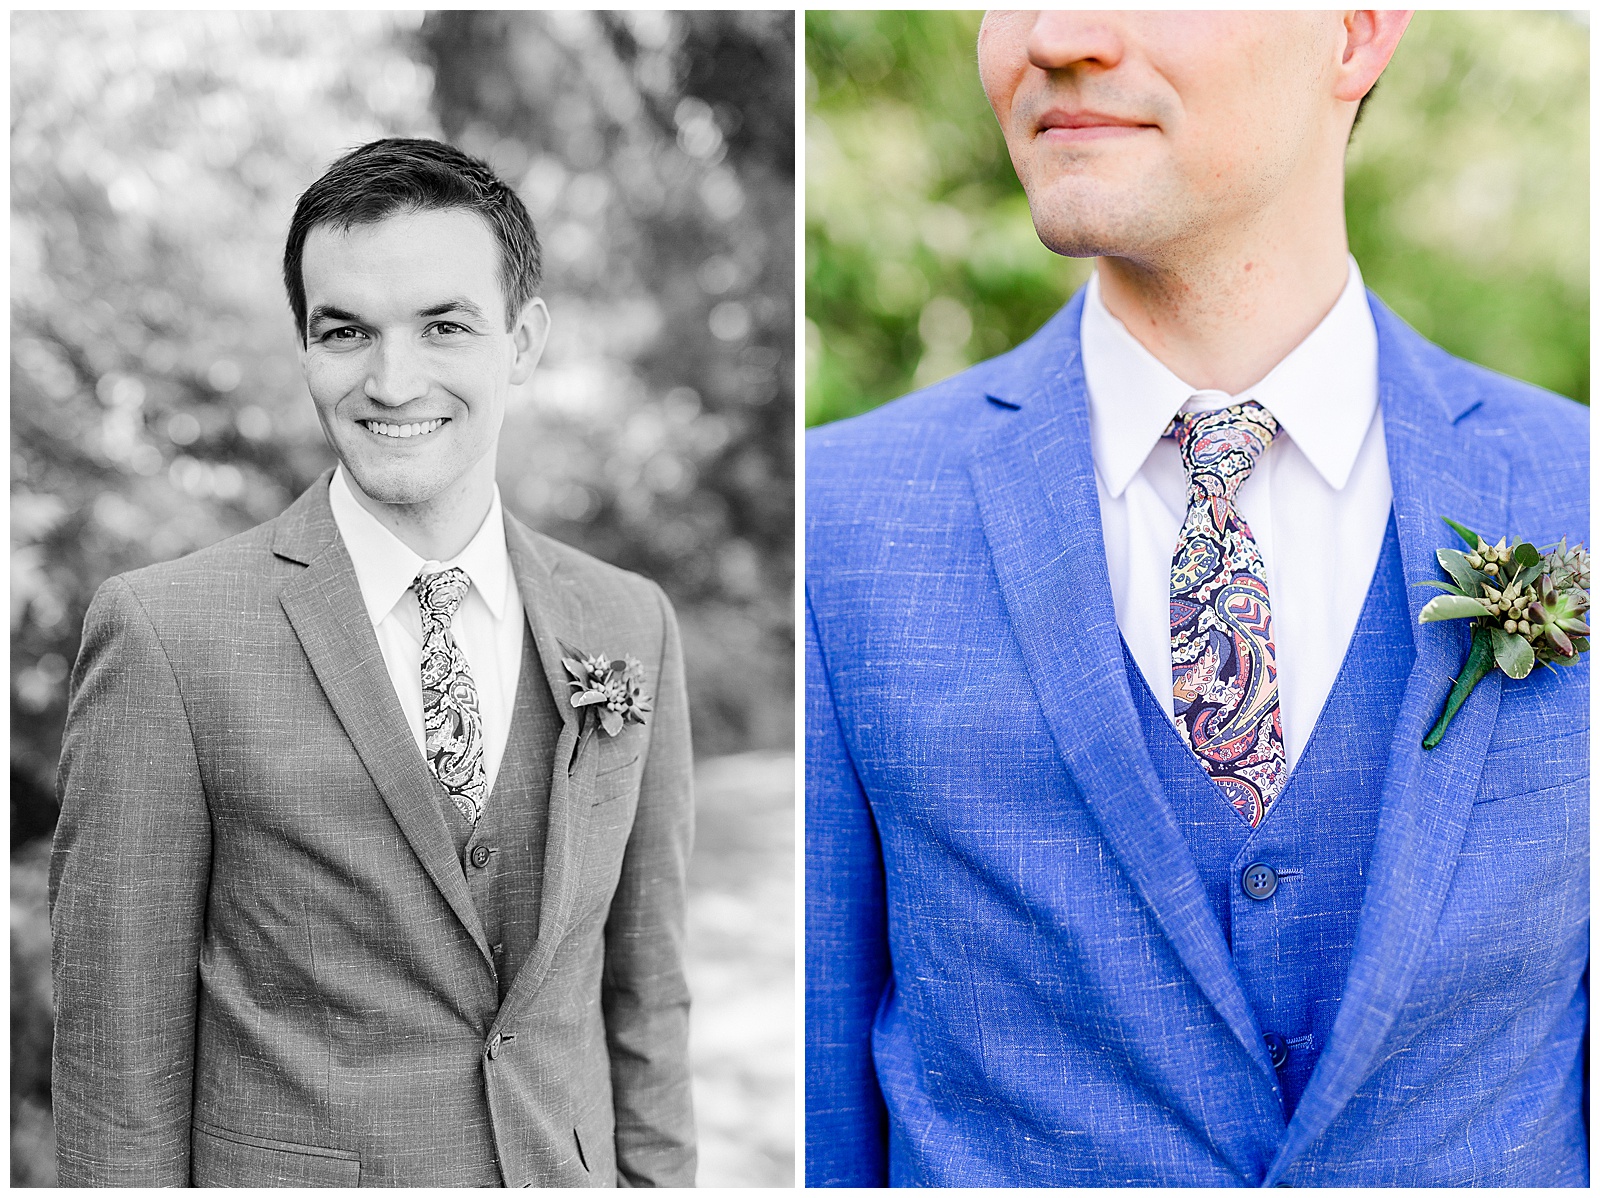 Dapper Blue Themed Suit Groom Portraits at Outdoorsy Summer Wedding at North Carolina Lakehouse in the Mountains | check out the full wedding at KevynDixonPhoto.com